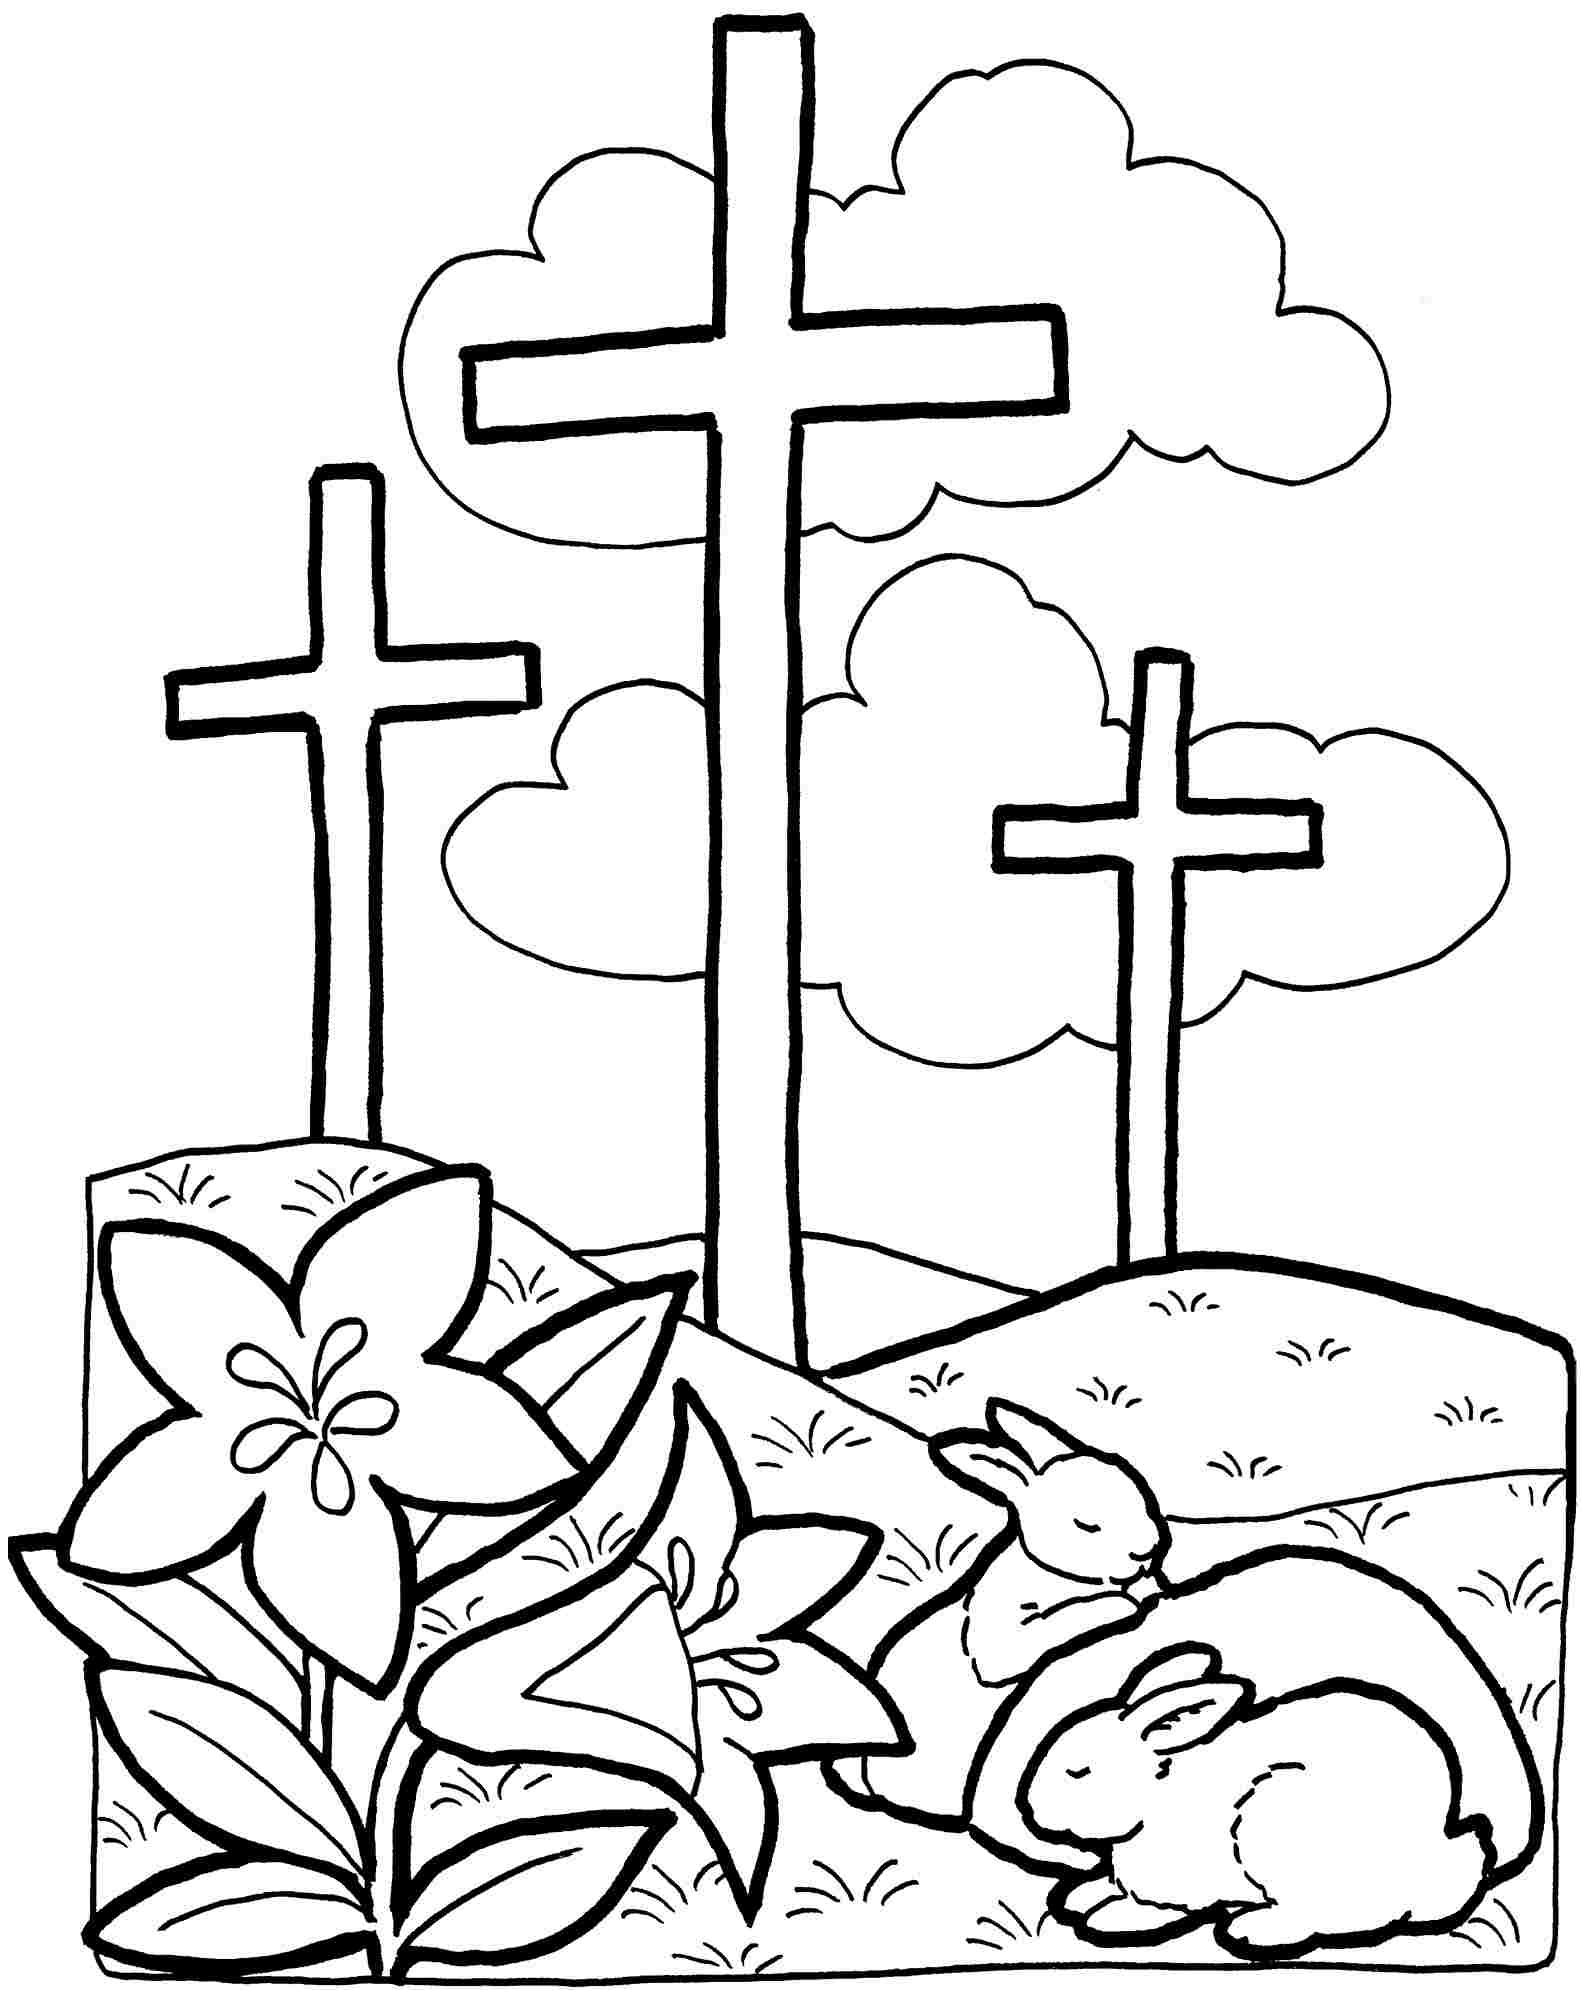 734 Cute Printable Easter Christian Coloring Pages with Animal character